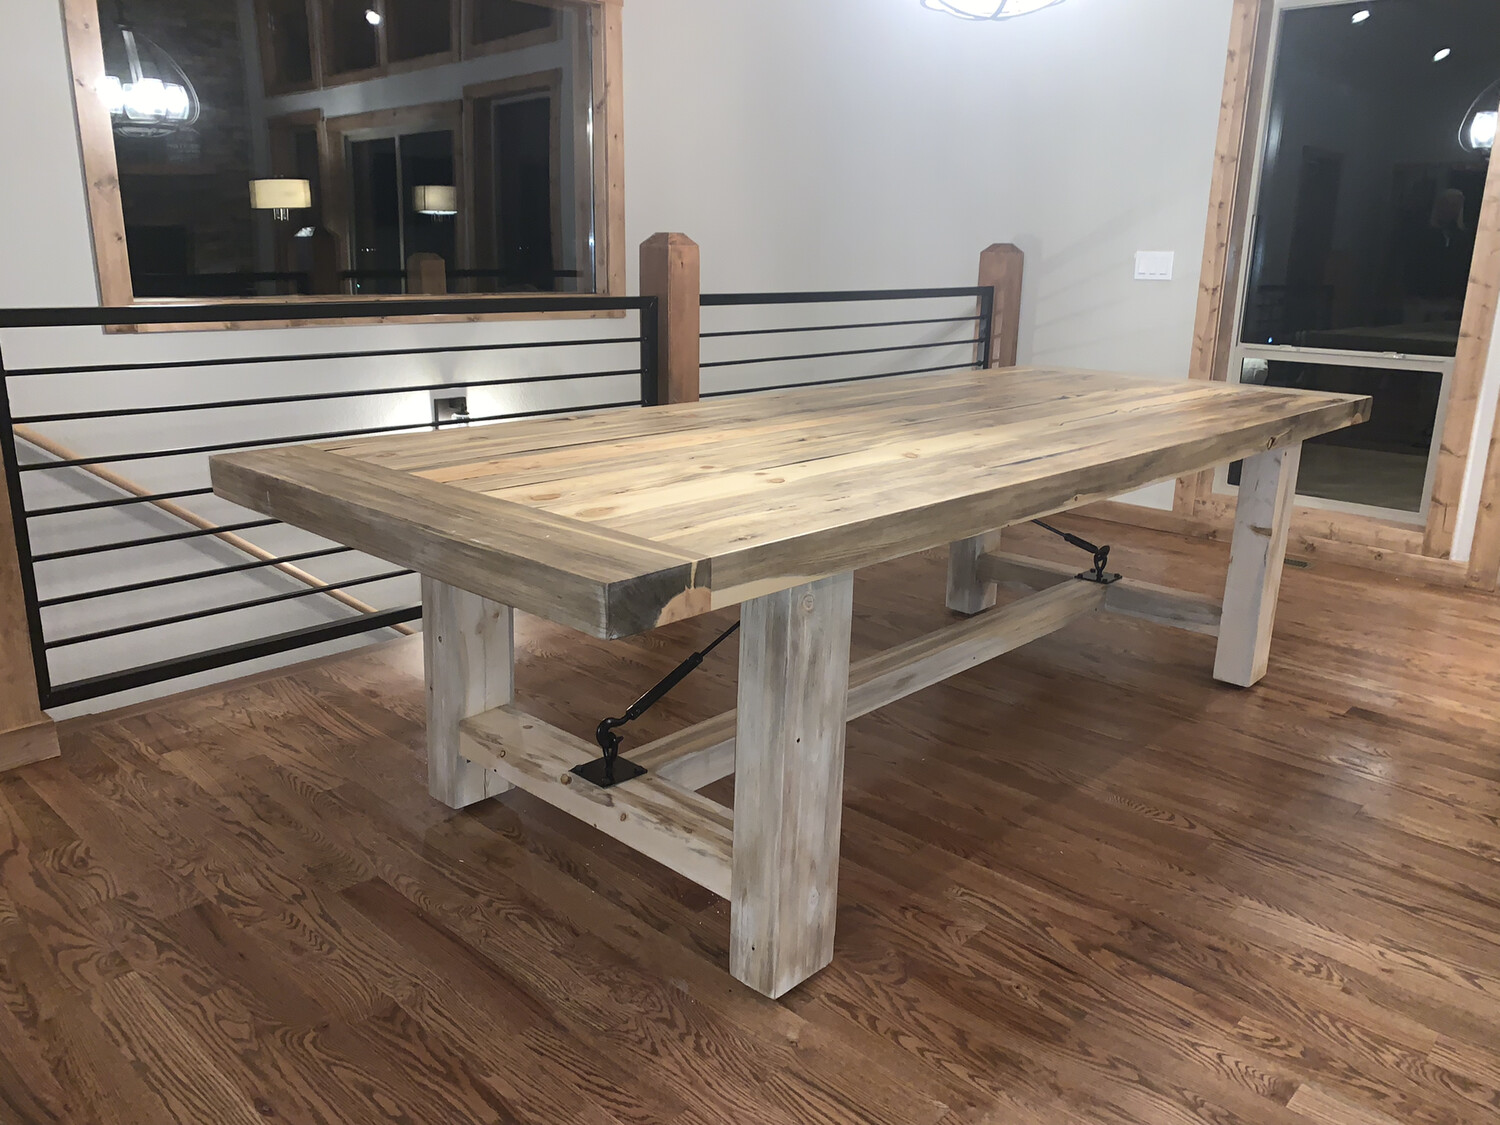 The Rancher Dining Table